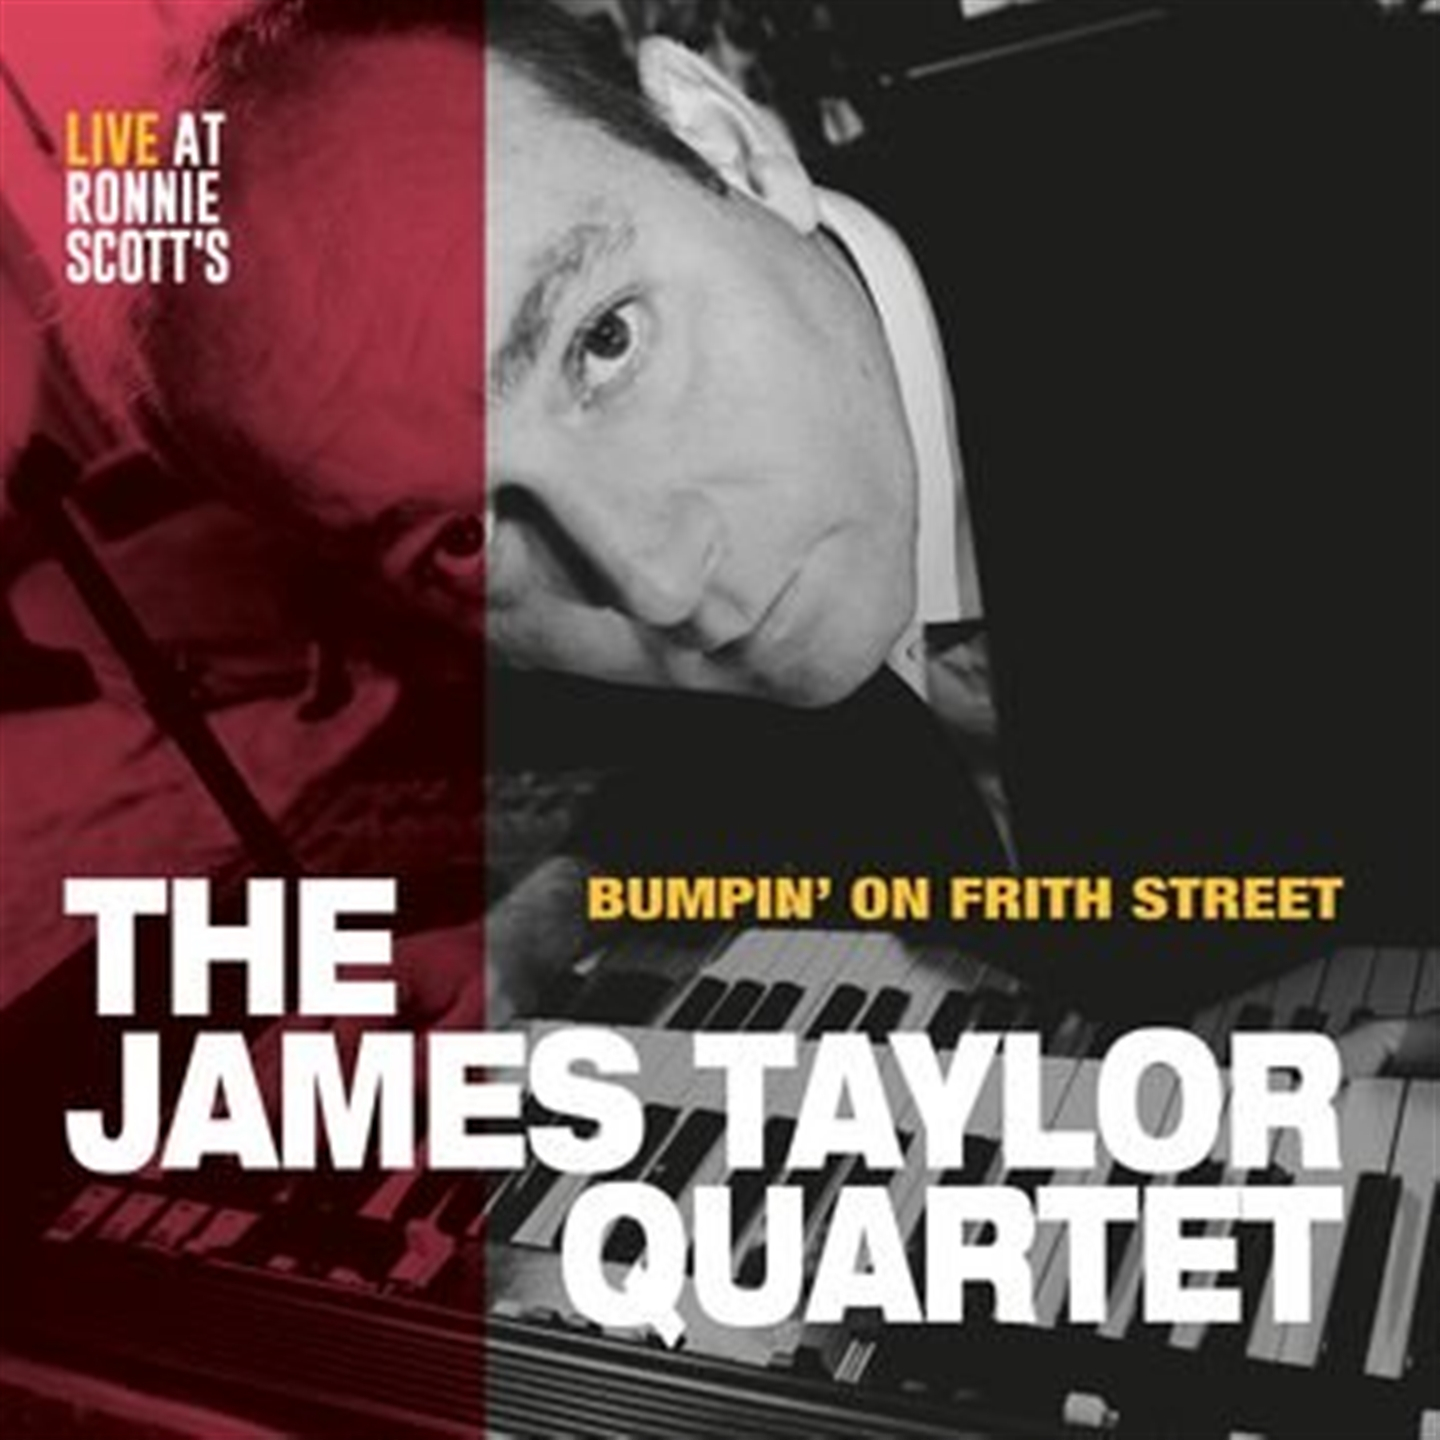 BUMPIN' ON FRITH STREET - LIVE AT RONNIE SCOTT'S [LP]